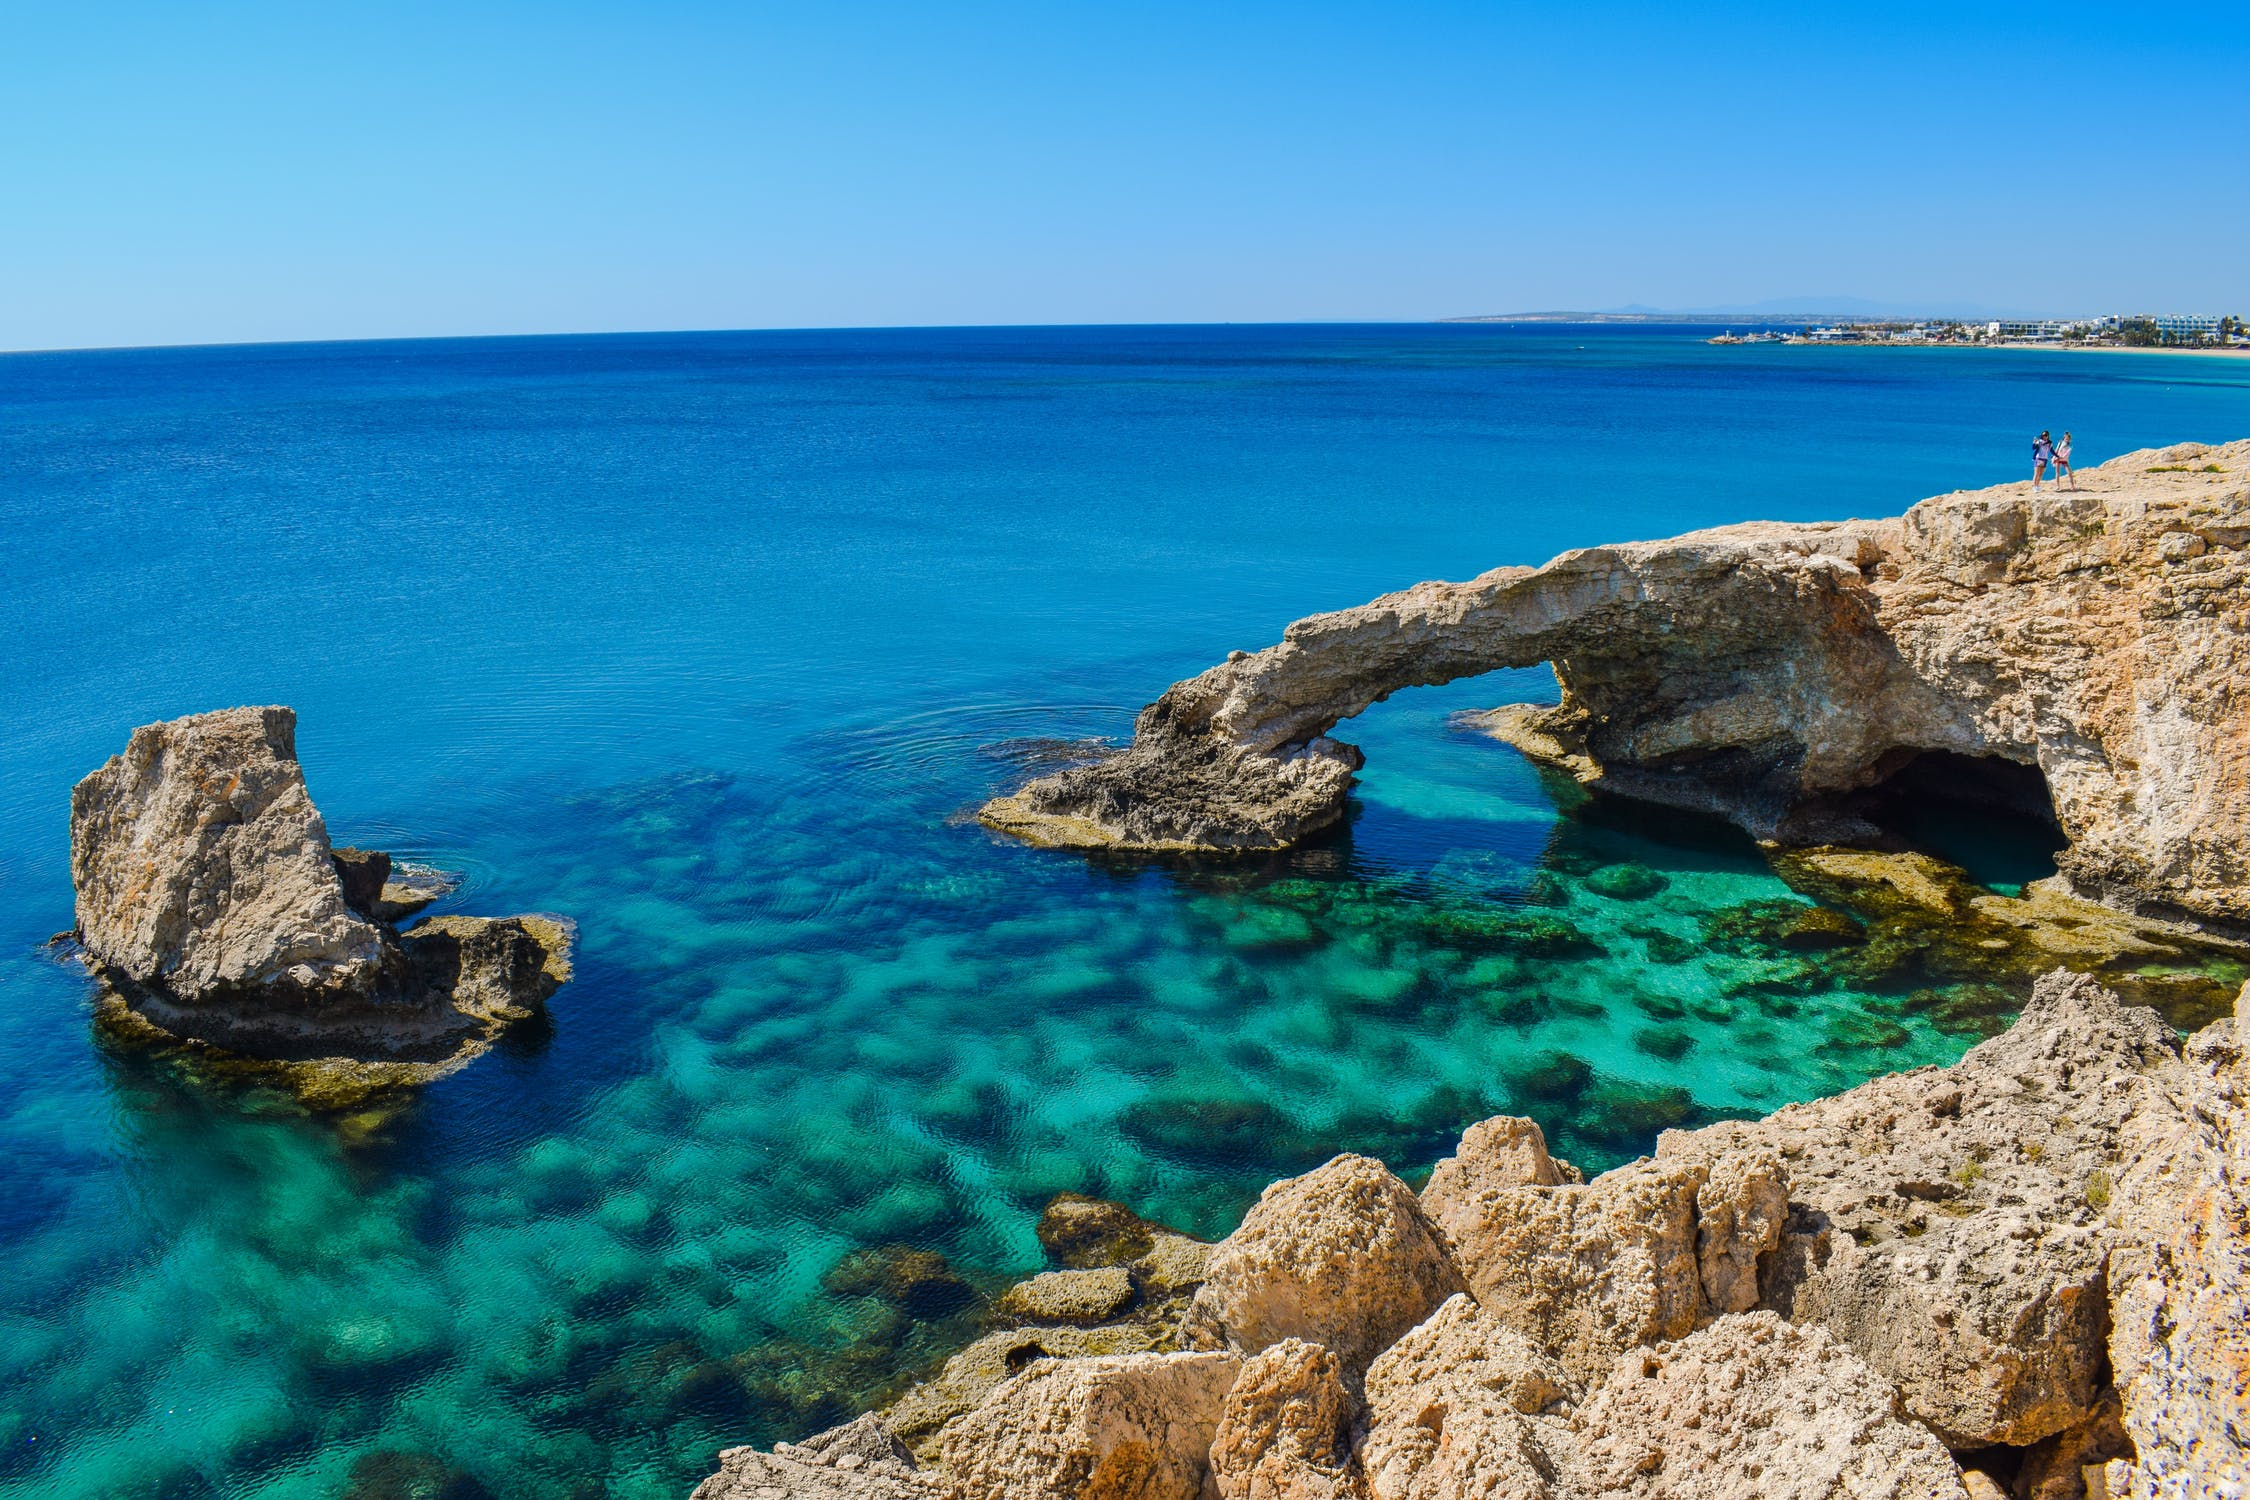 Rock formations in the sea off the island of Cyprus